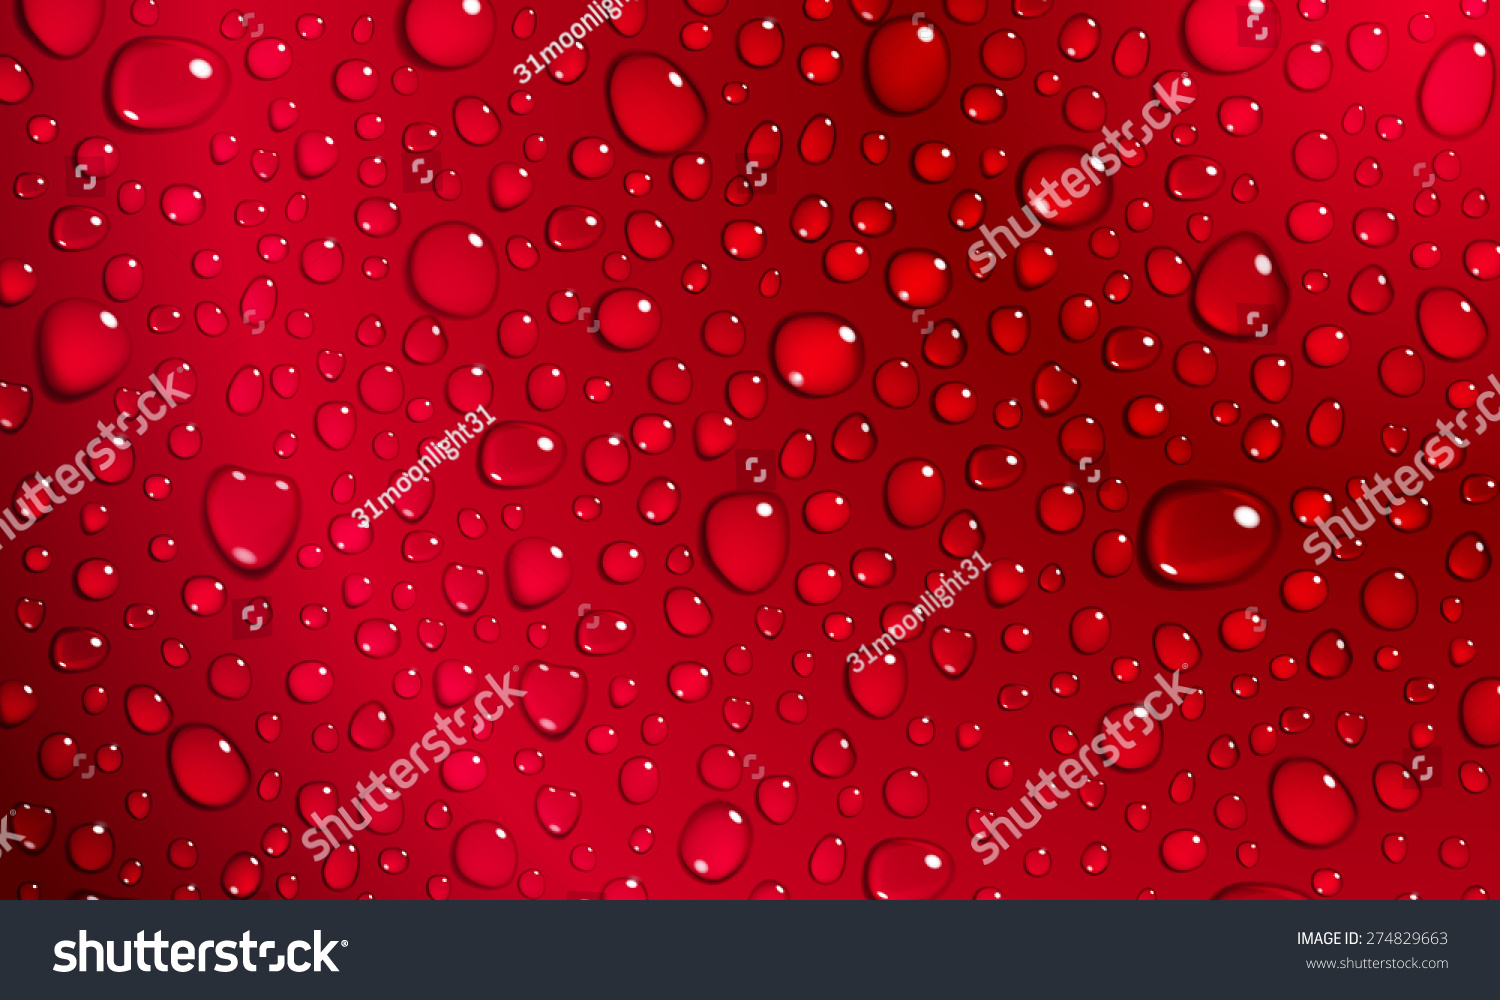 Background Of Water Droplets On The Surface In Red Colors Stock Vector ...